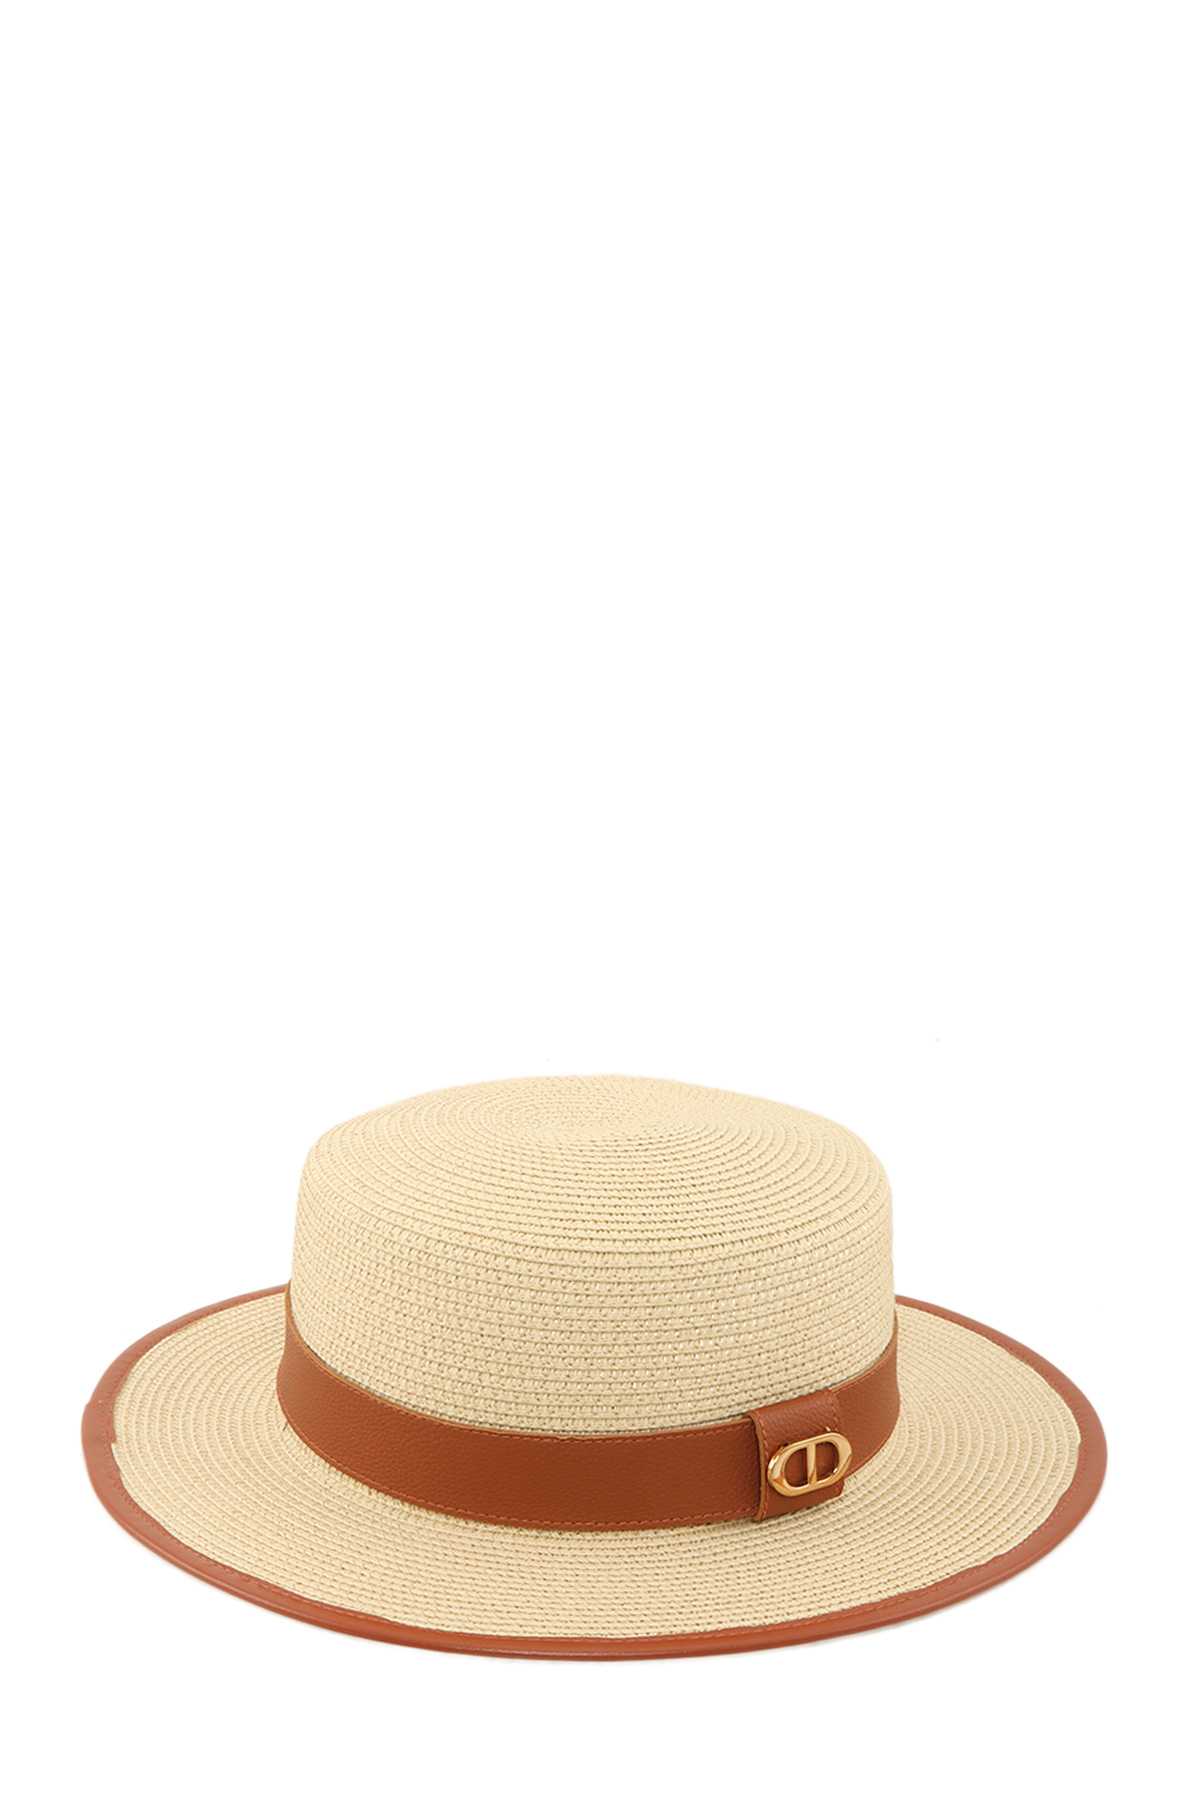 Straw Fashion Hat With Strap and Half Circle Accent